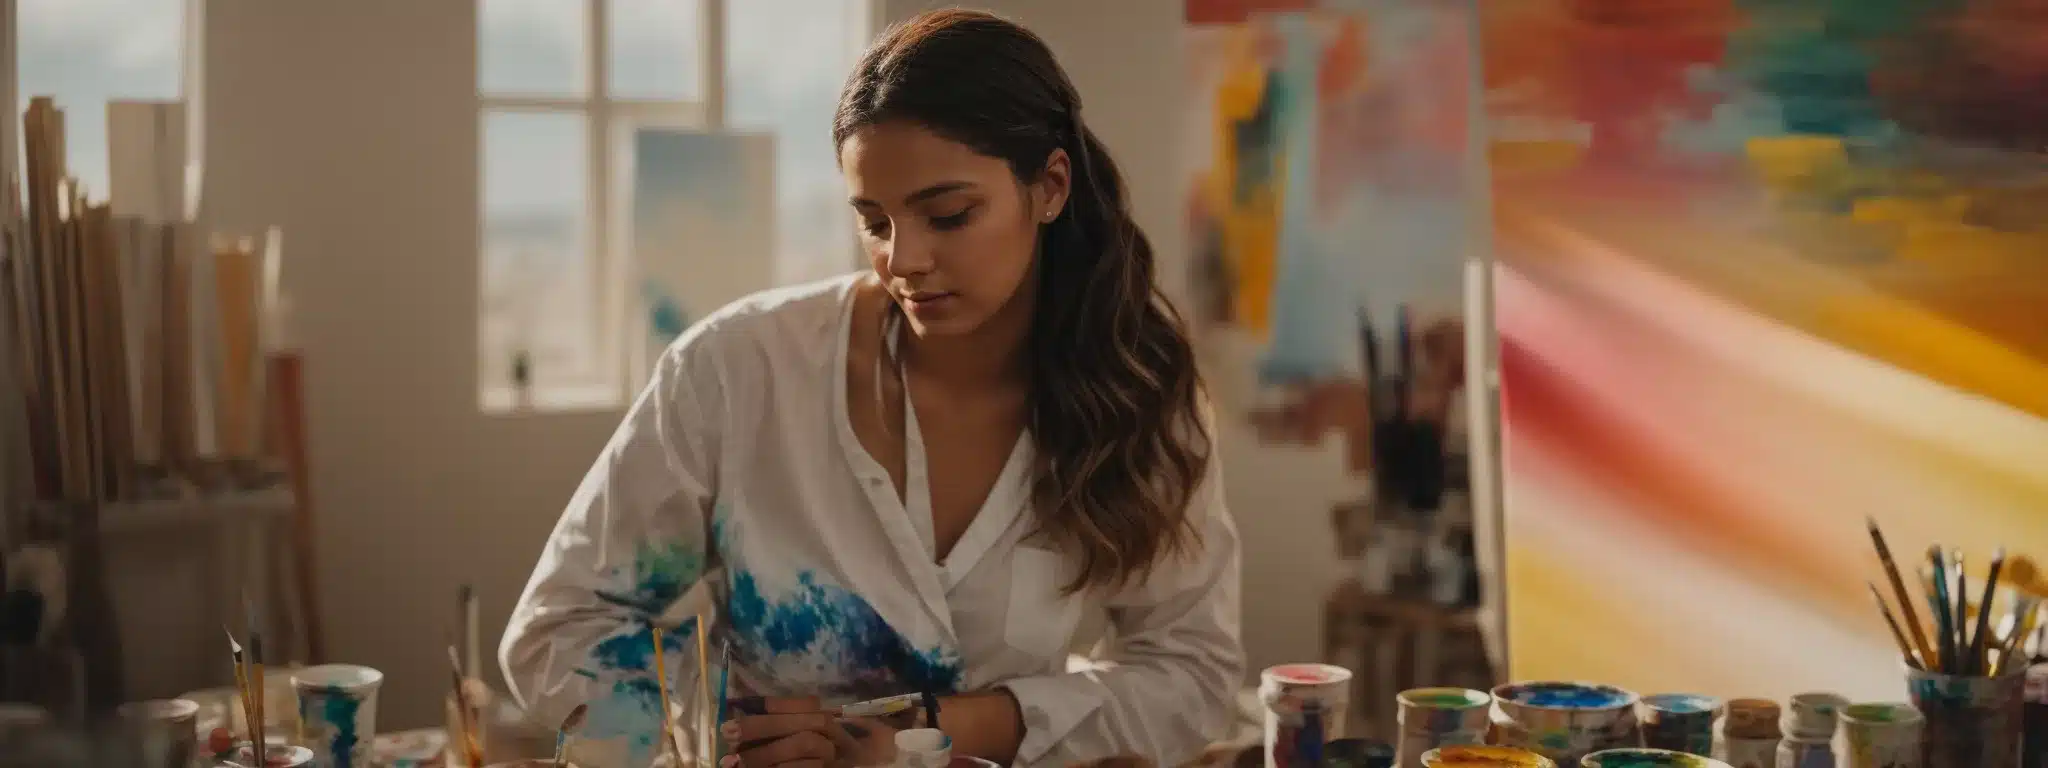 A Painter Thoughtfully Blending Colors On A Vibrant Canvas In A Sunlit Studio, Symbolizing The Art Of Crafting A Brand Narrative.